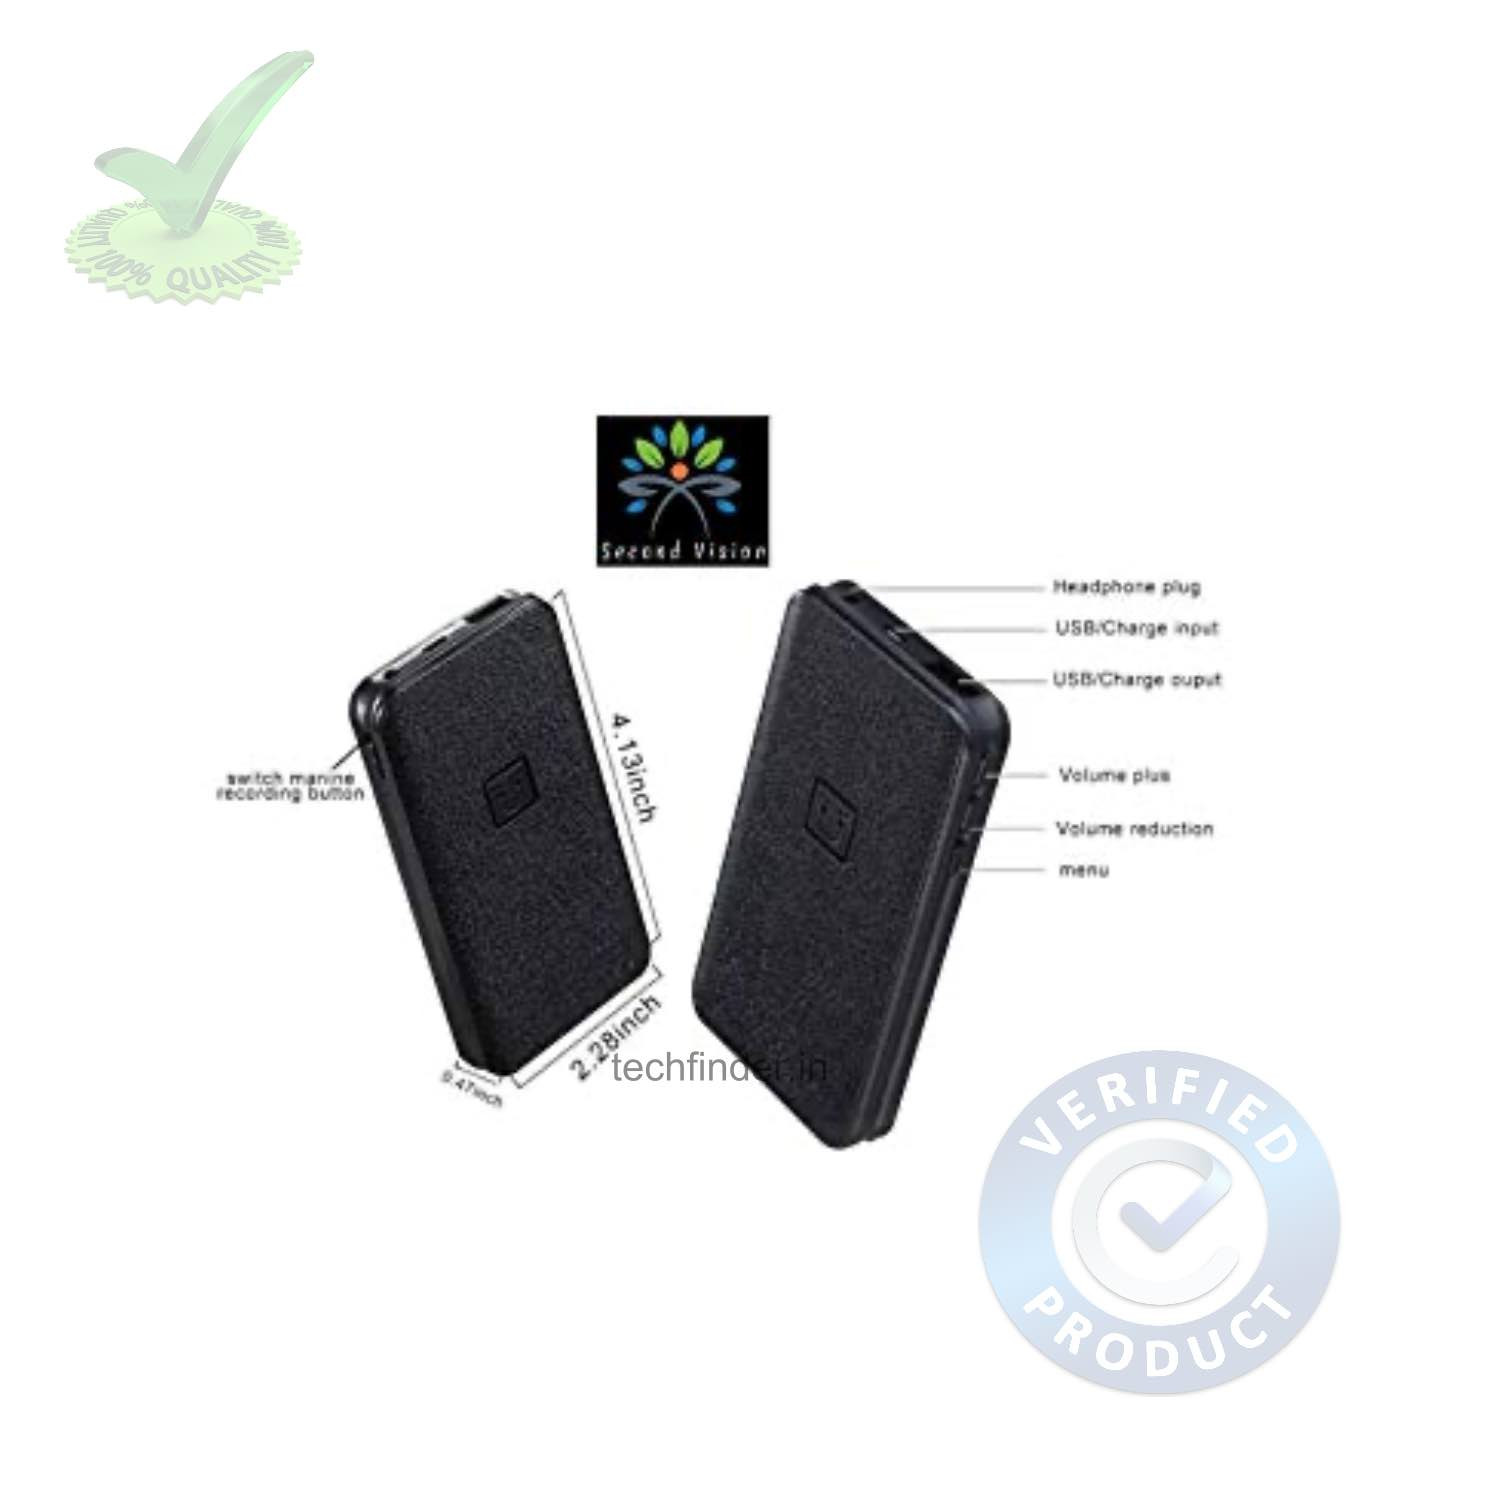 32GB Long Time Spy Hidden Voice Audio Recorder in Power Bank